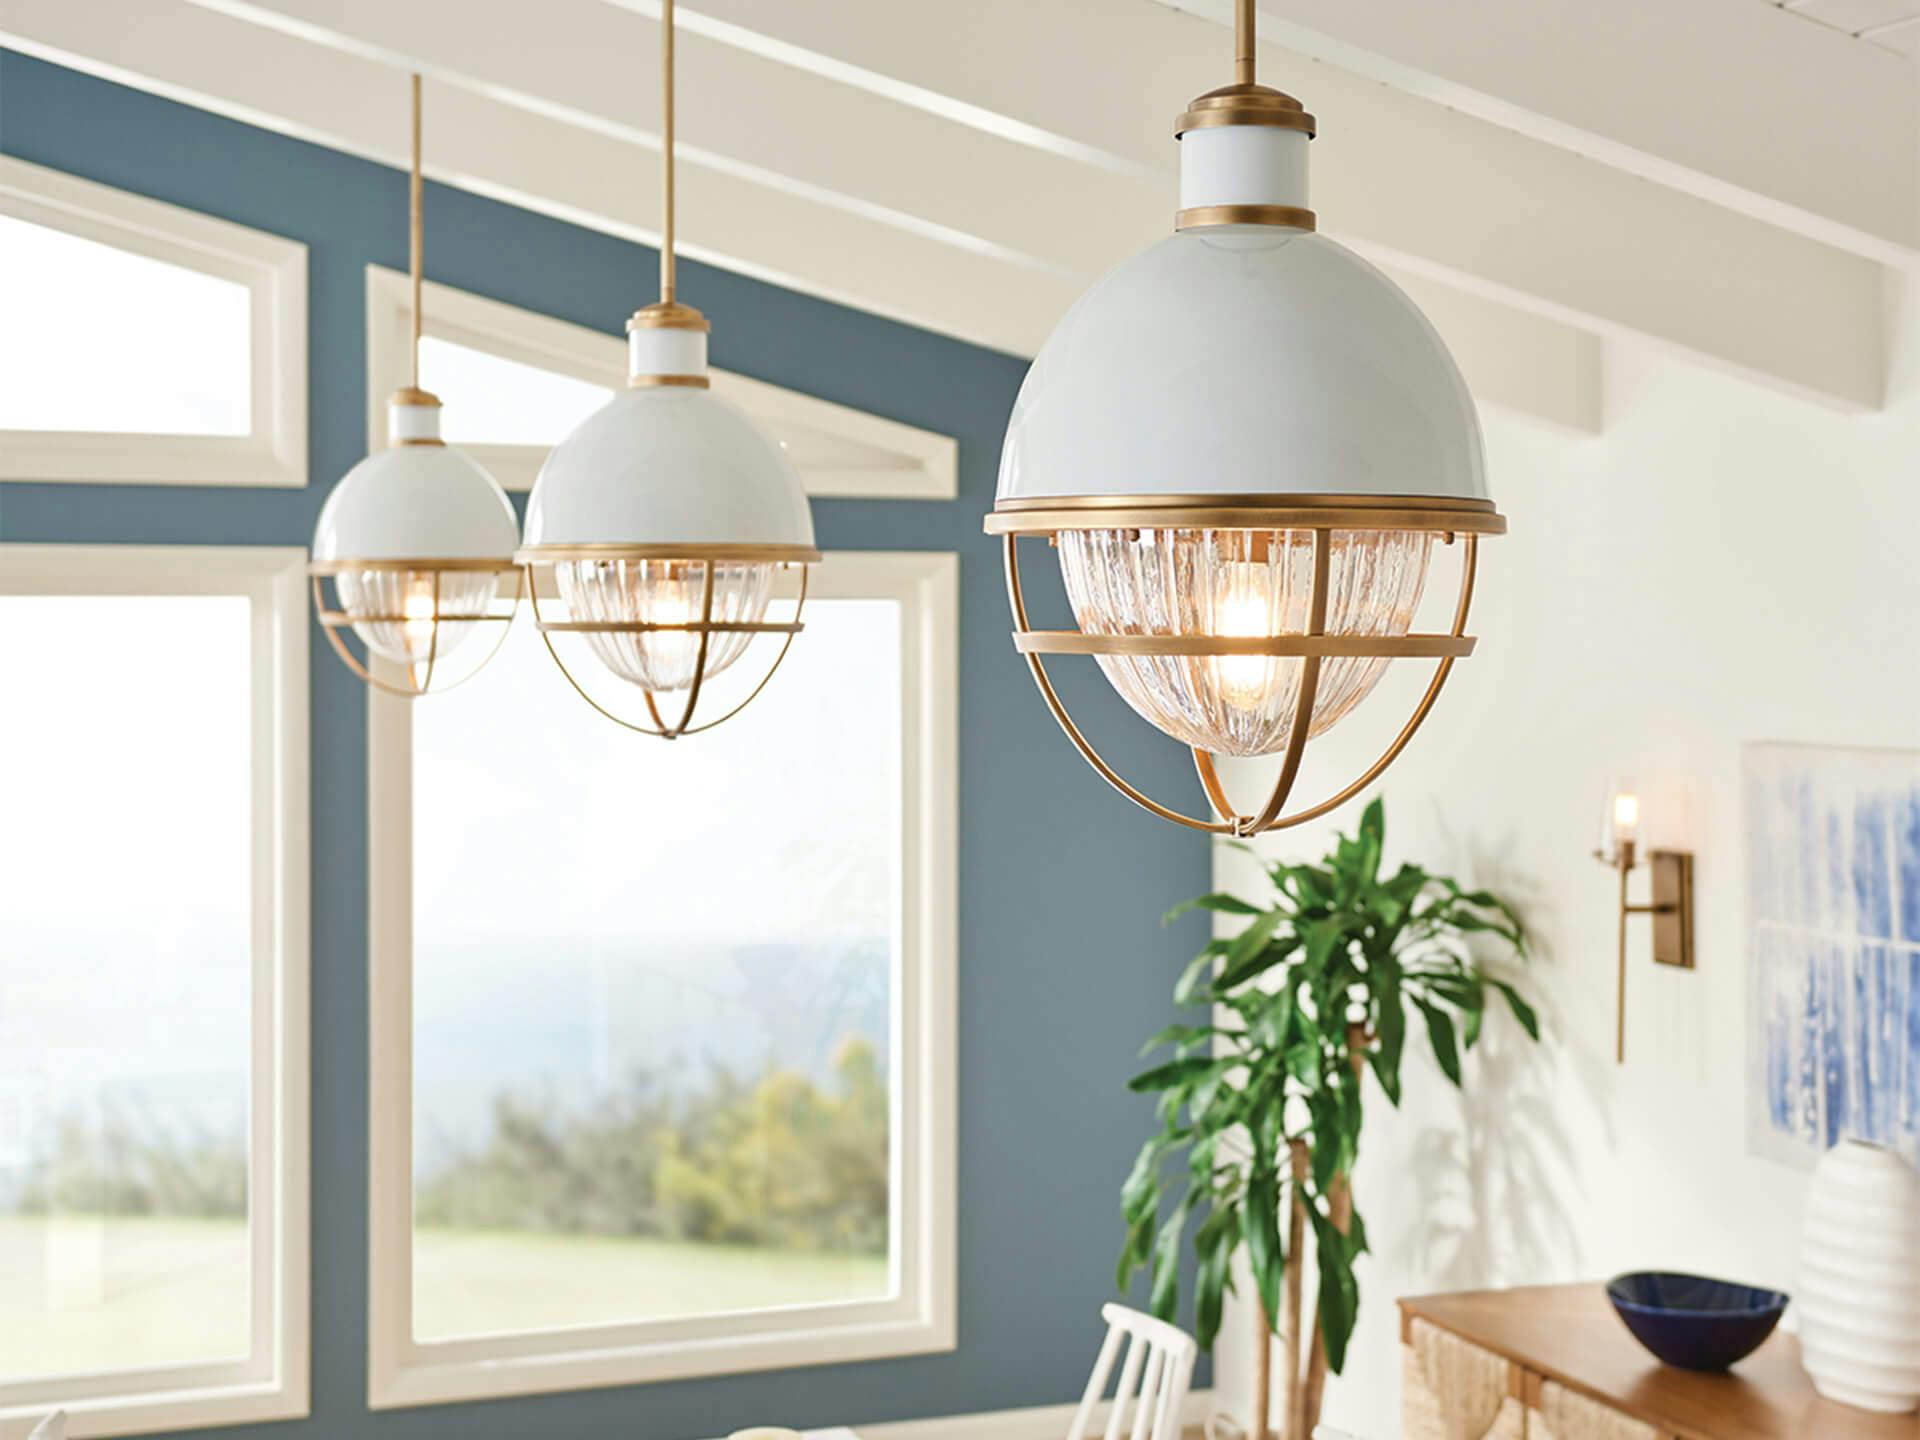 Three Tollis Alton pendants with white finish in a coastal style living room in the daytime turned on